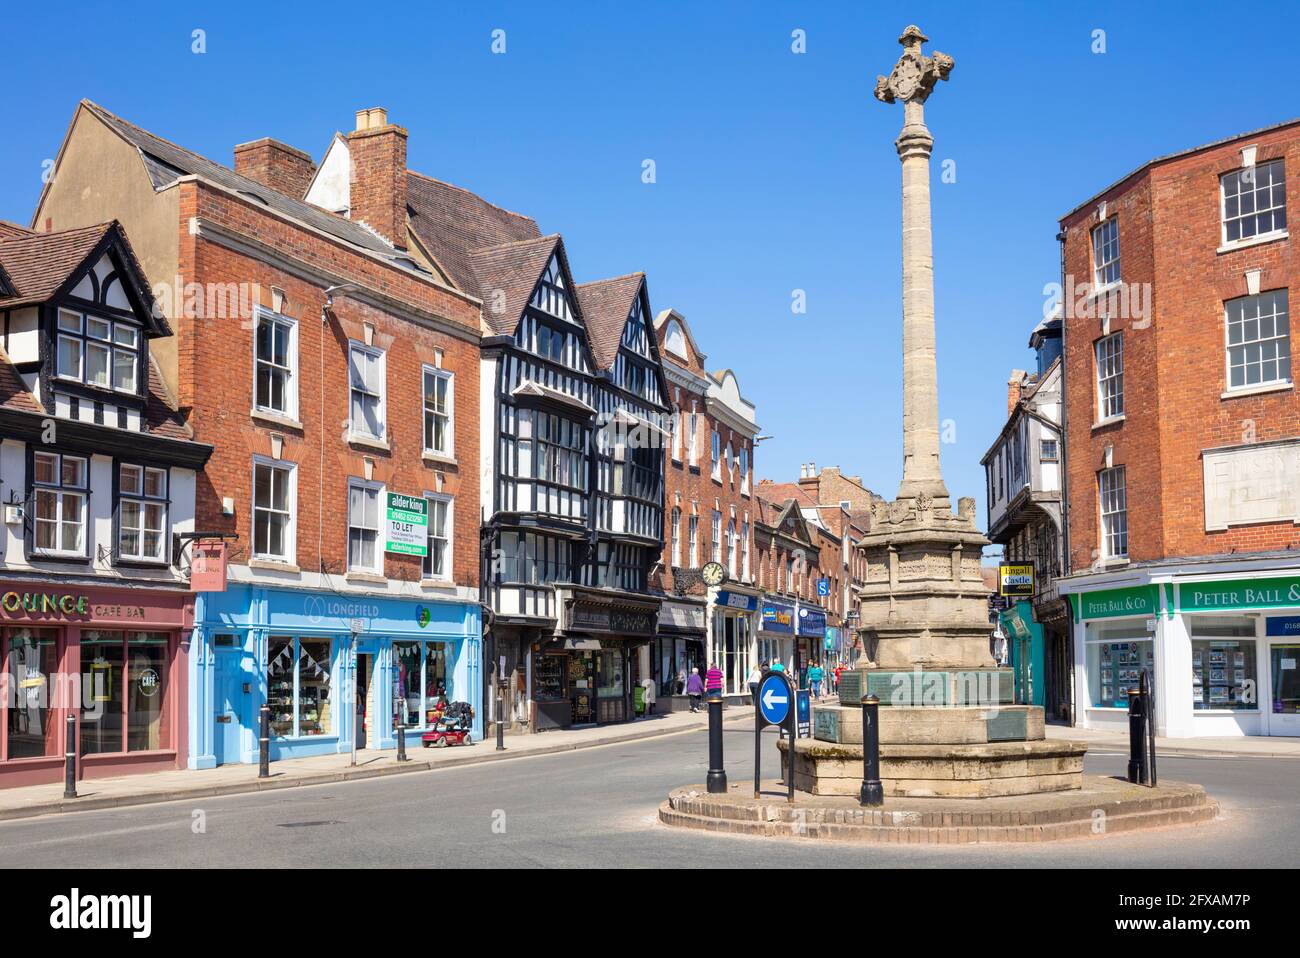 Tewkesbury Town centre shops roundabout and the Tewkesbury war memorial or The Cross, Tewkesbury, Gloucestershire, England, GB, UK, Europe Stock Photo